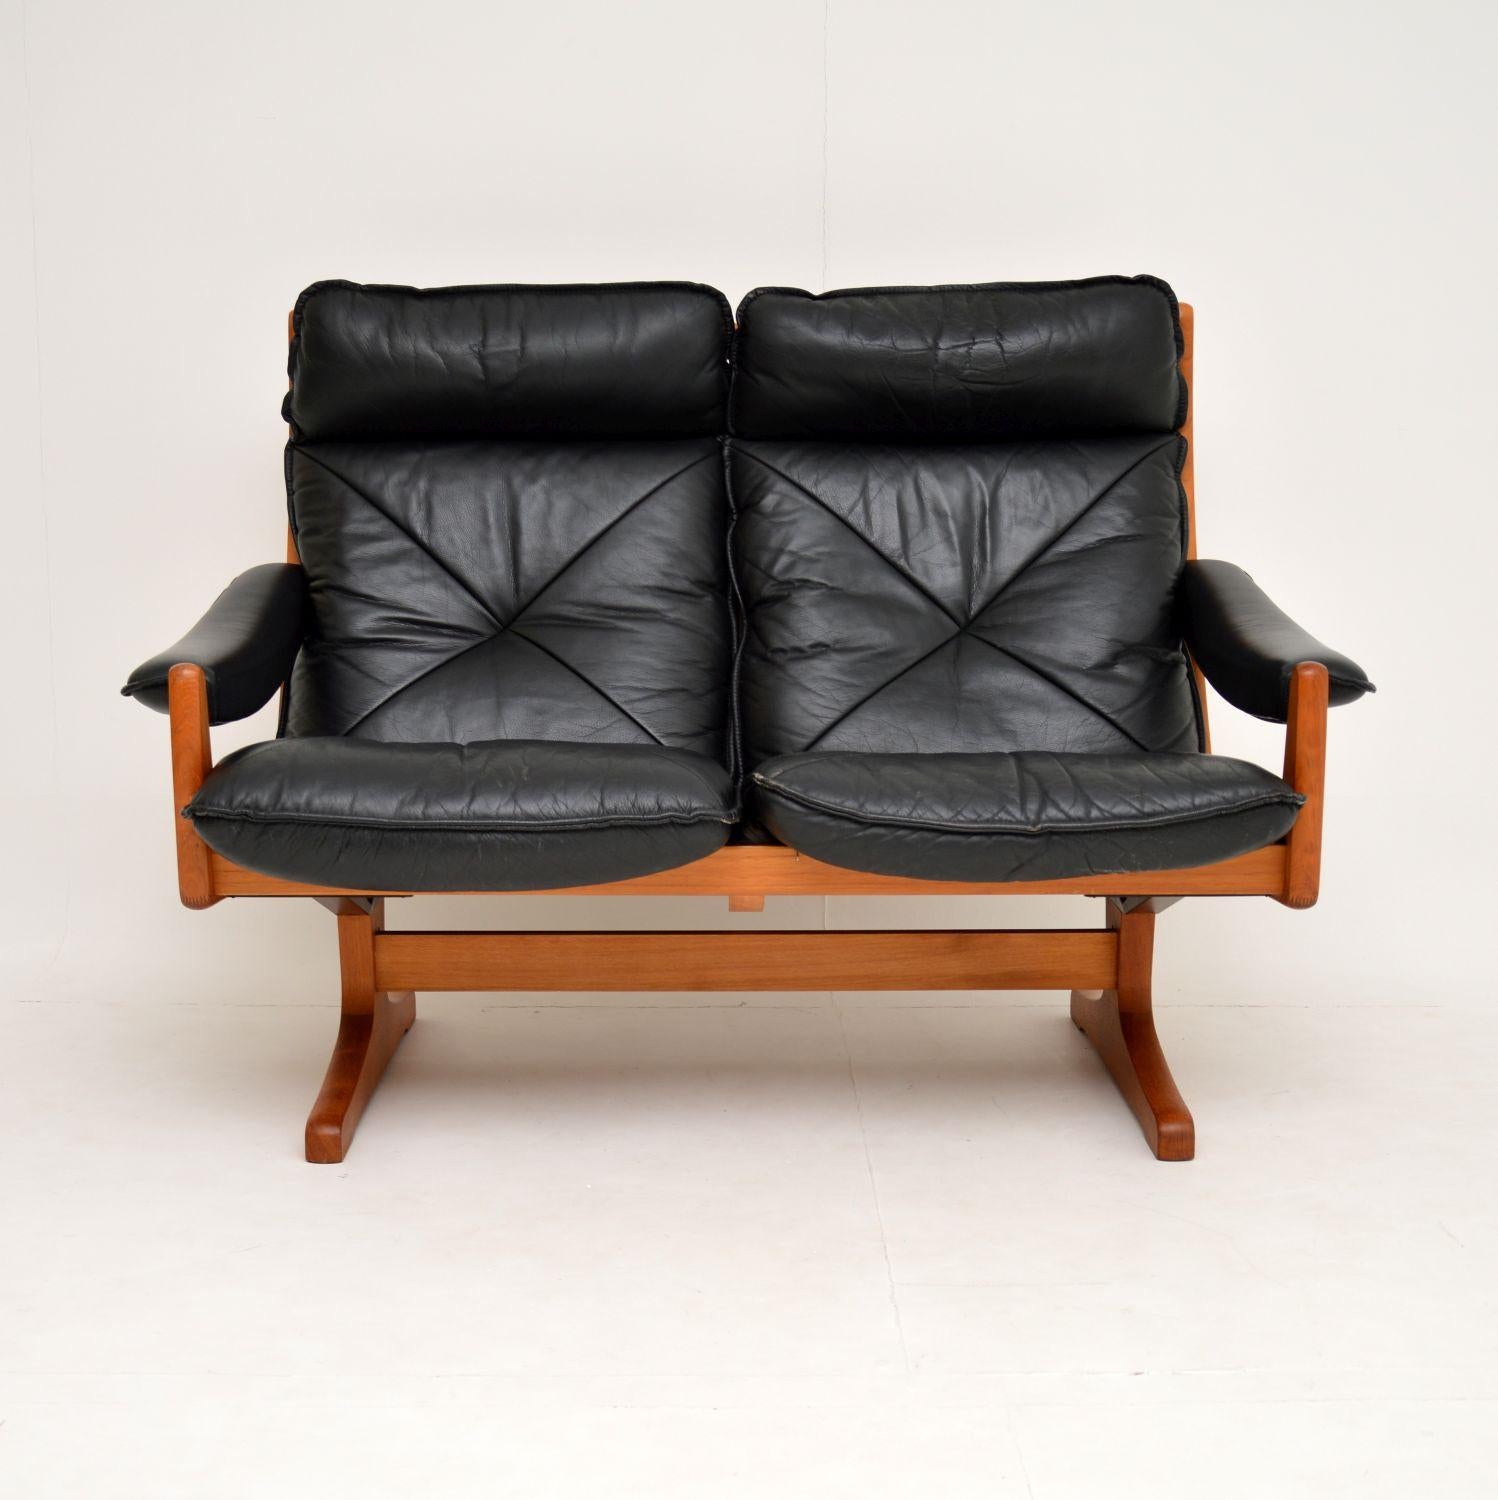 A stunning and extremely comfortable vintage teak and leather sofa. This was made in Norway in the 1970s by Lied Mobler, it was designed by Soda Galvano. It is if super quality and is in amazing condition for its age, with only some very minor wear